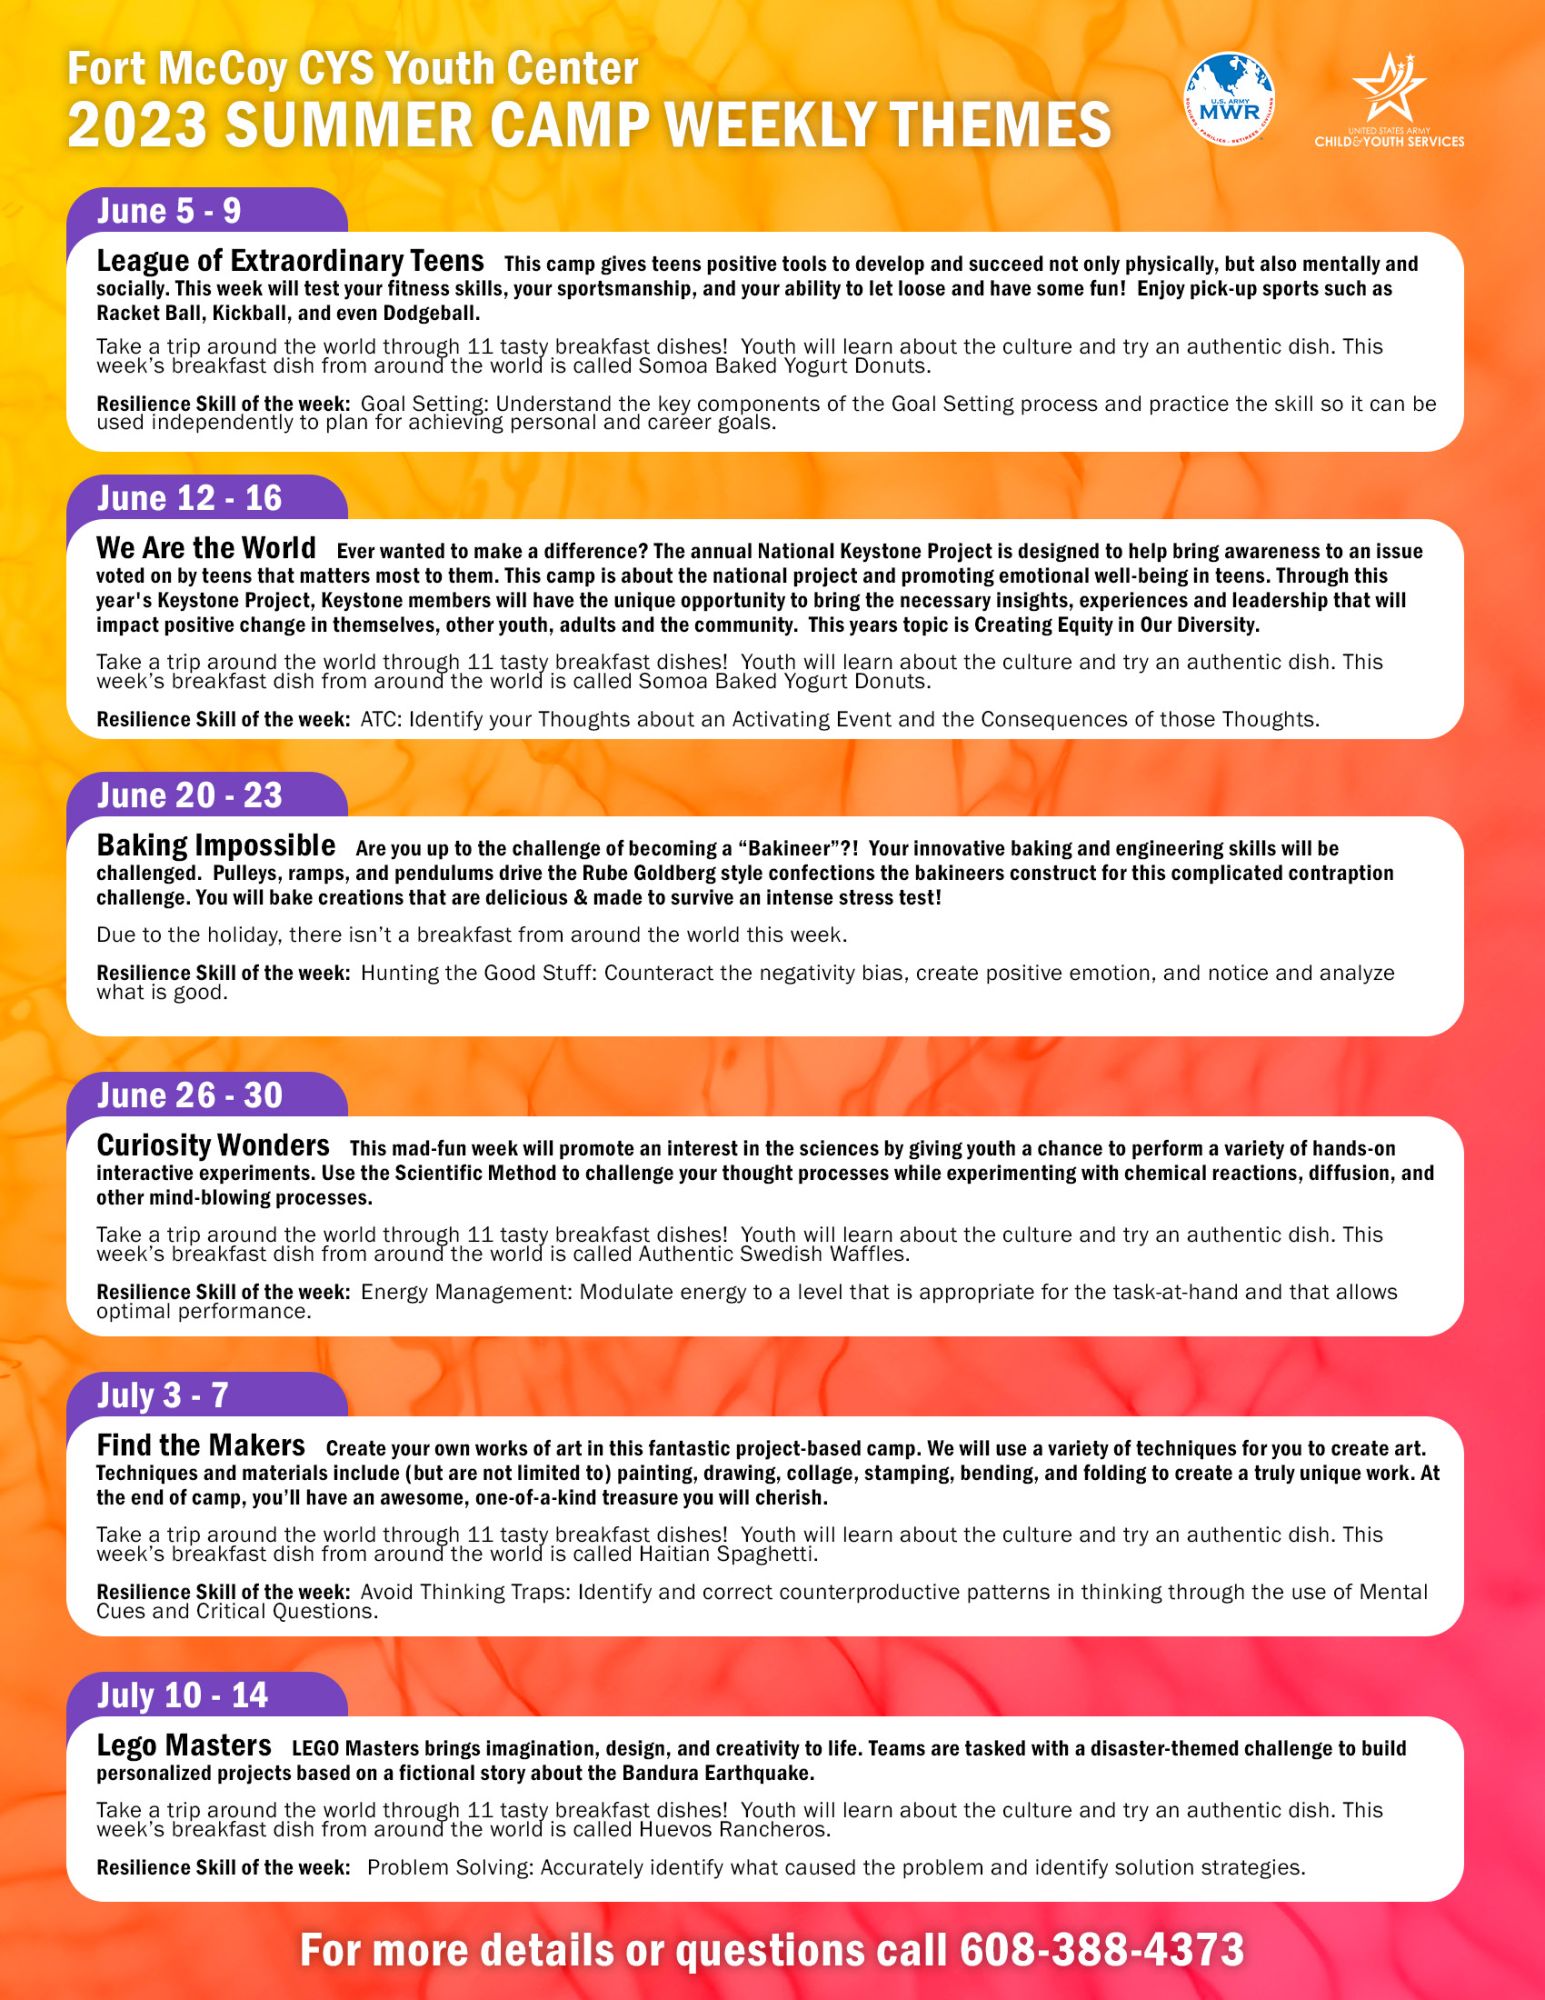 Youth Center_2023_summer_themes Version 3_Page_1.jpg